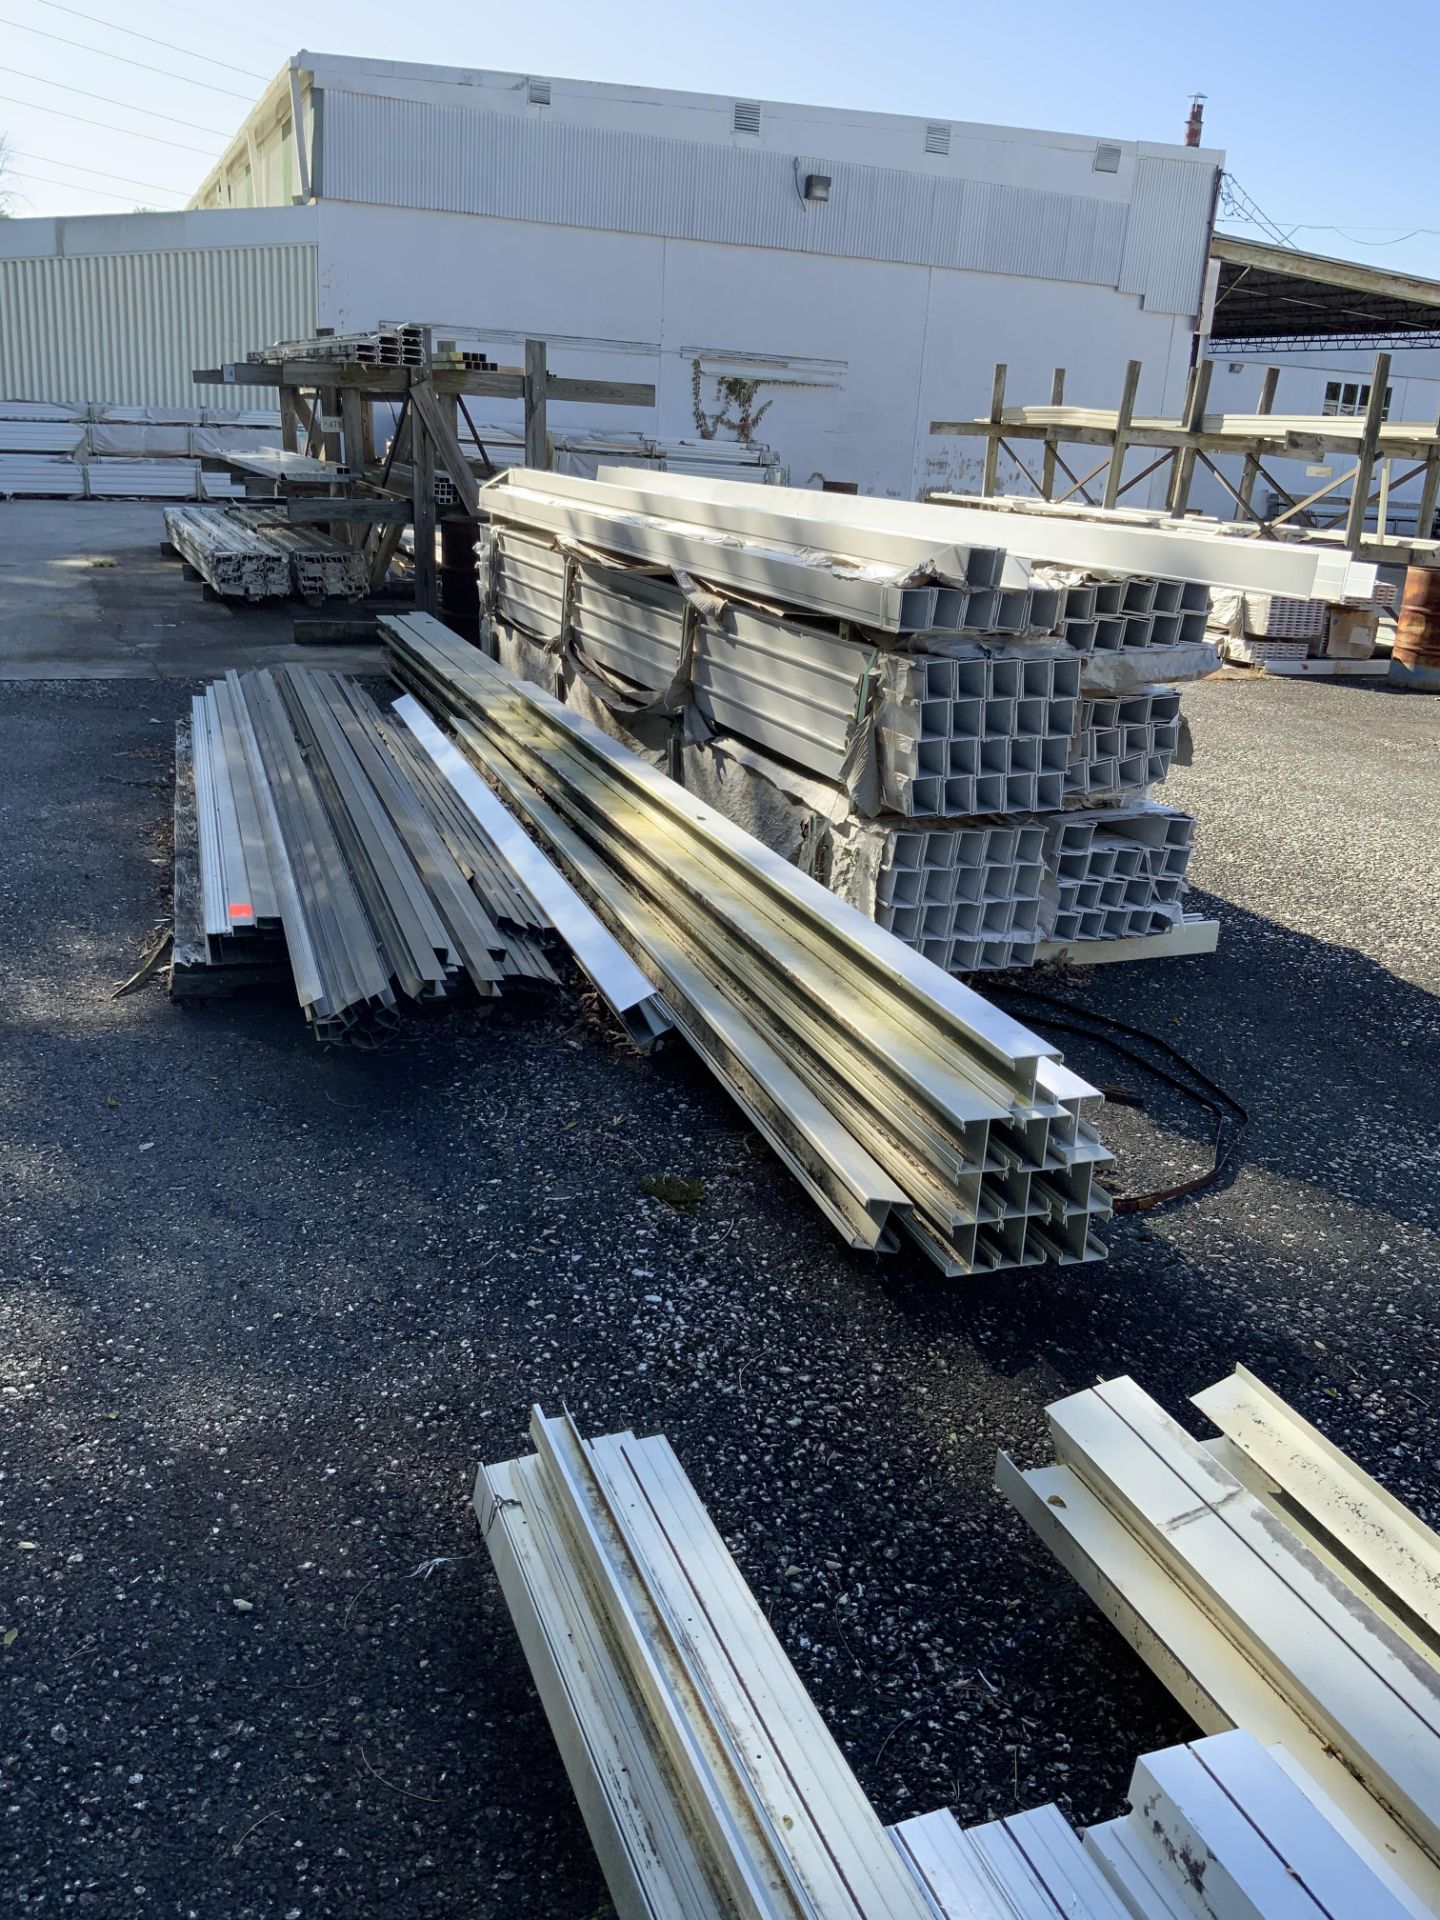 Extruded Aluminum Stock of Various Sizes - Image 2 of 10